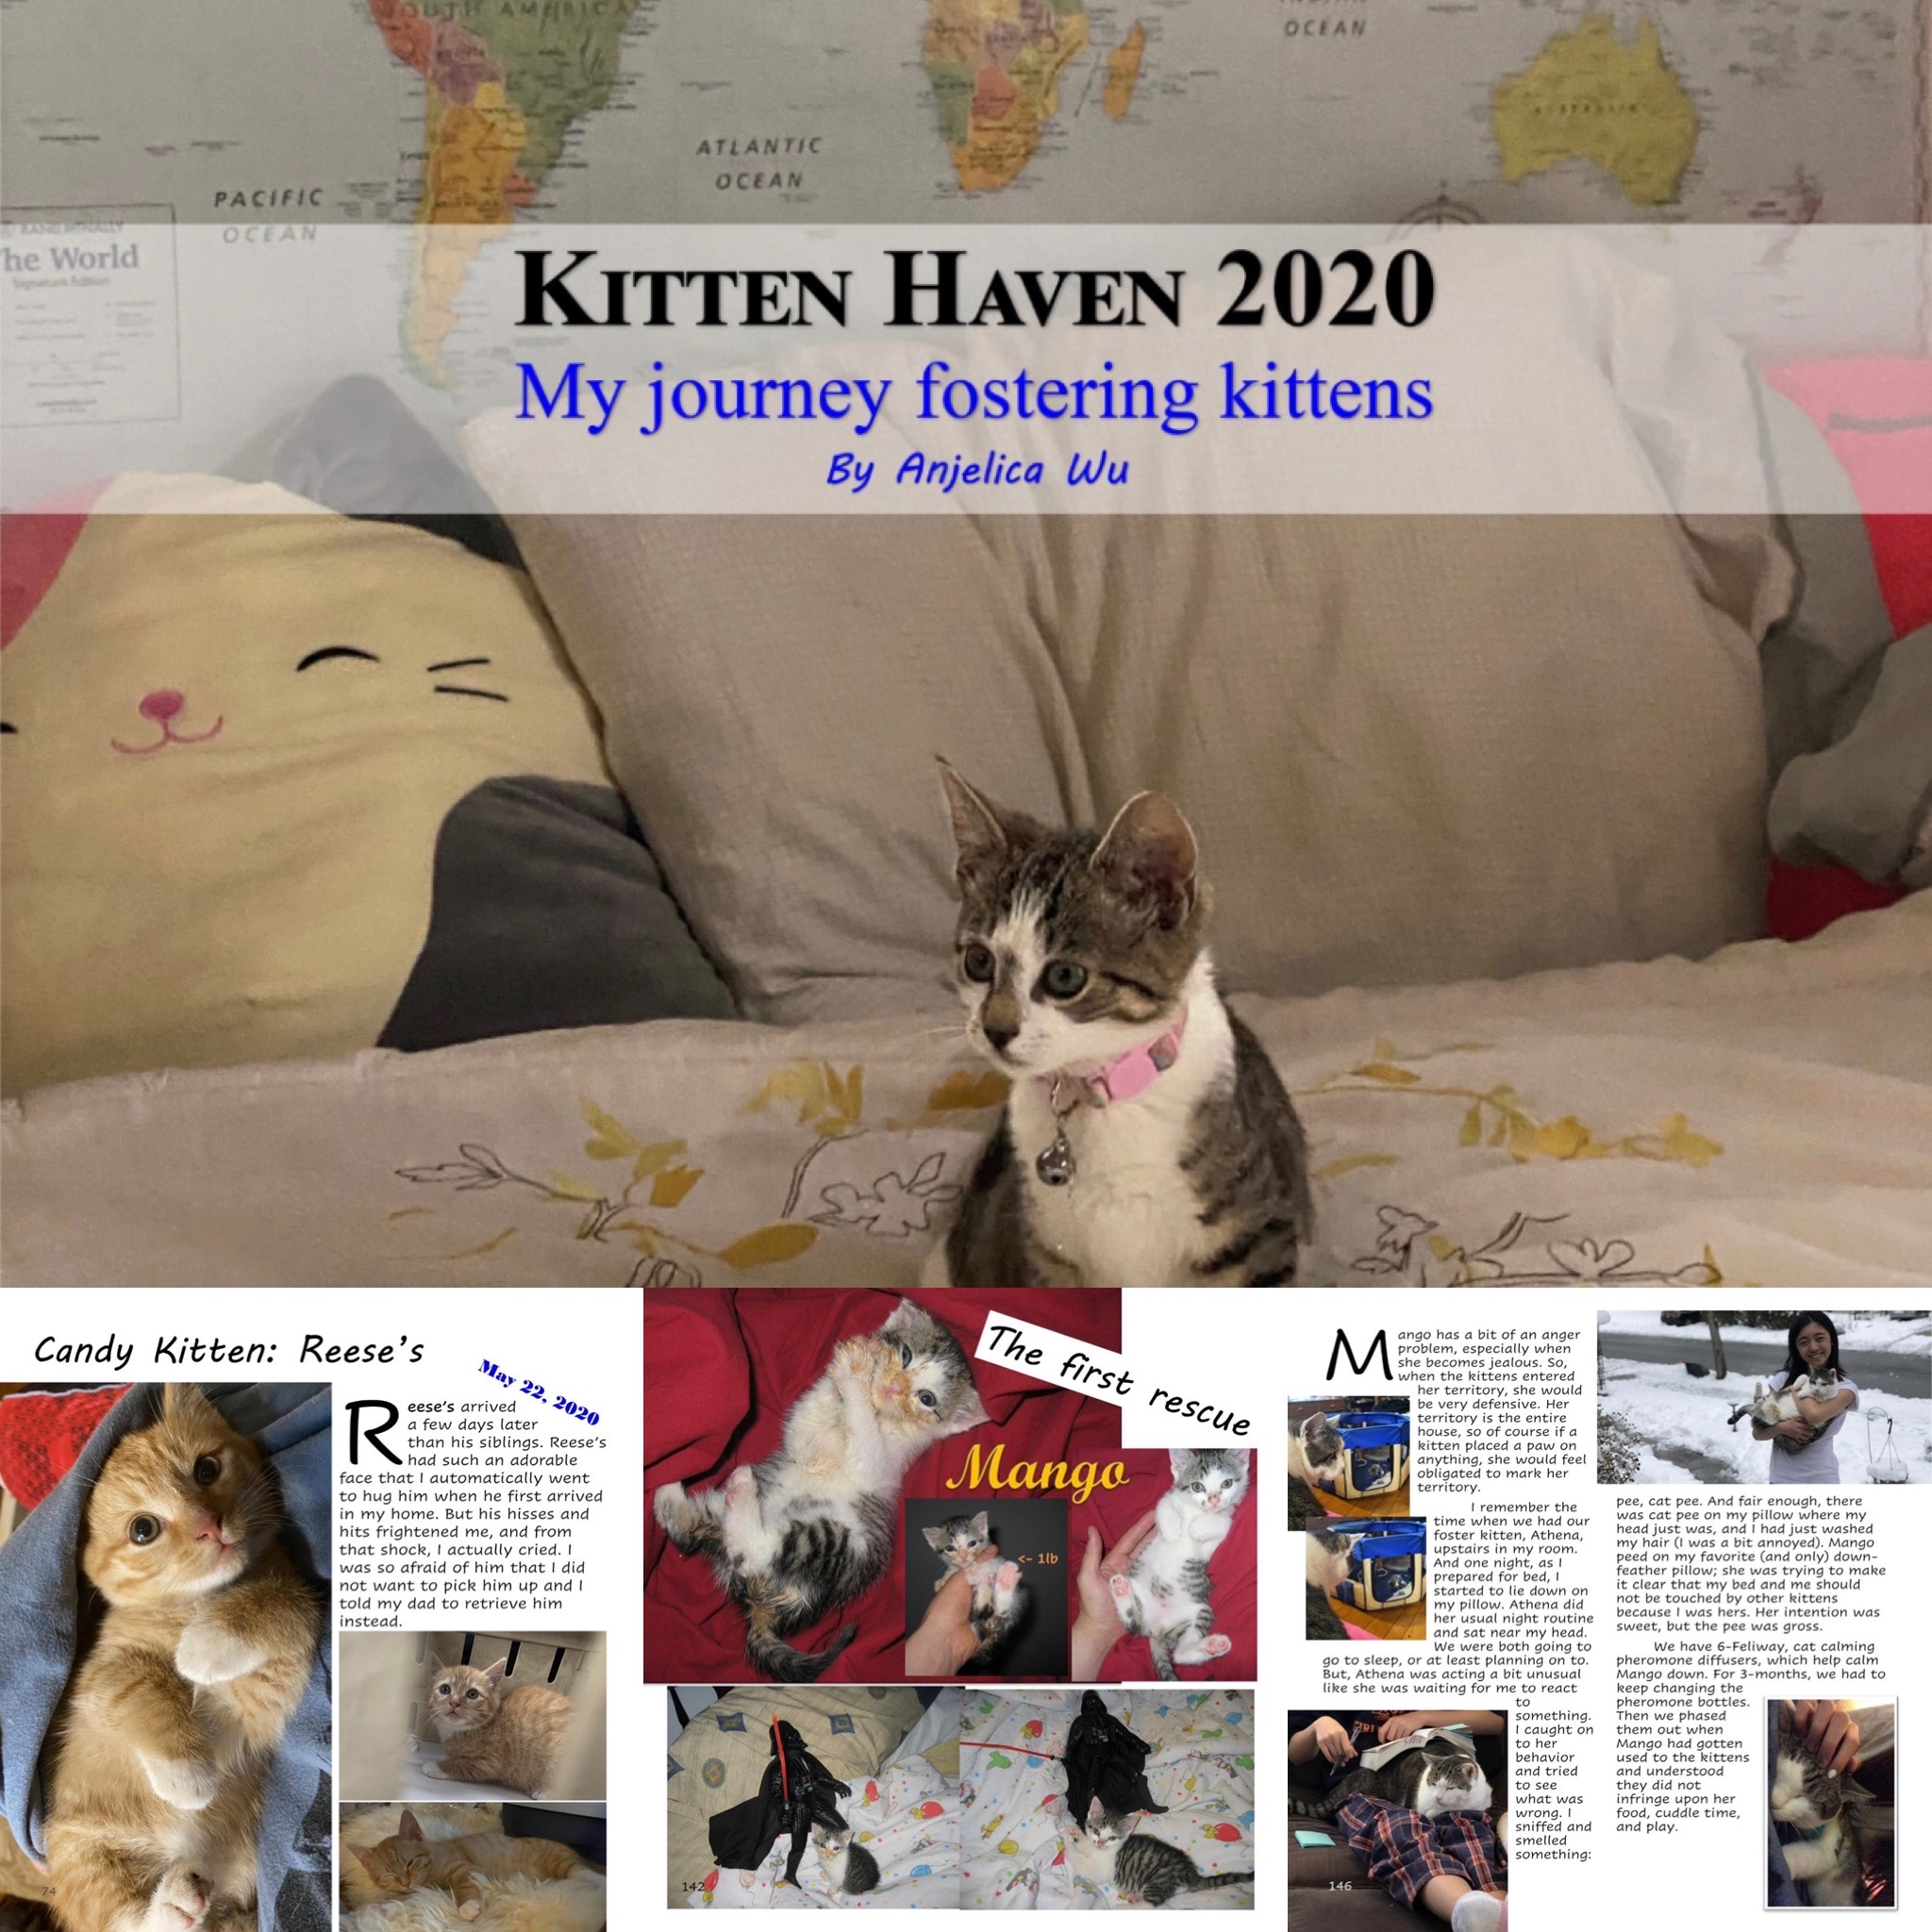 Kitty Haven 2020